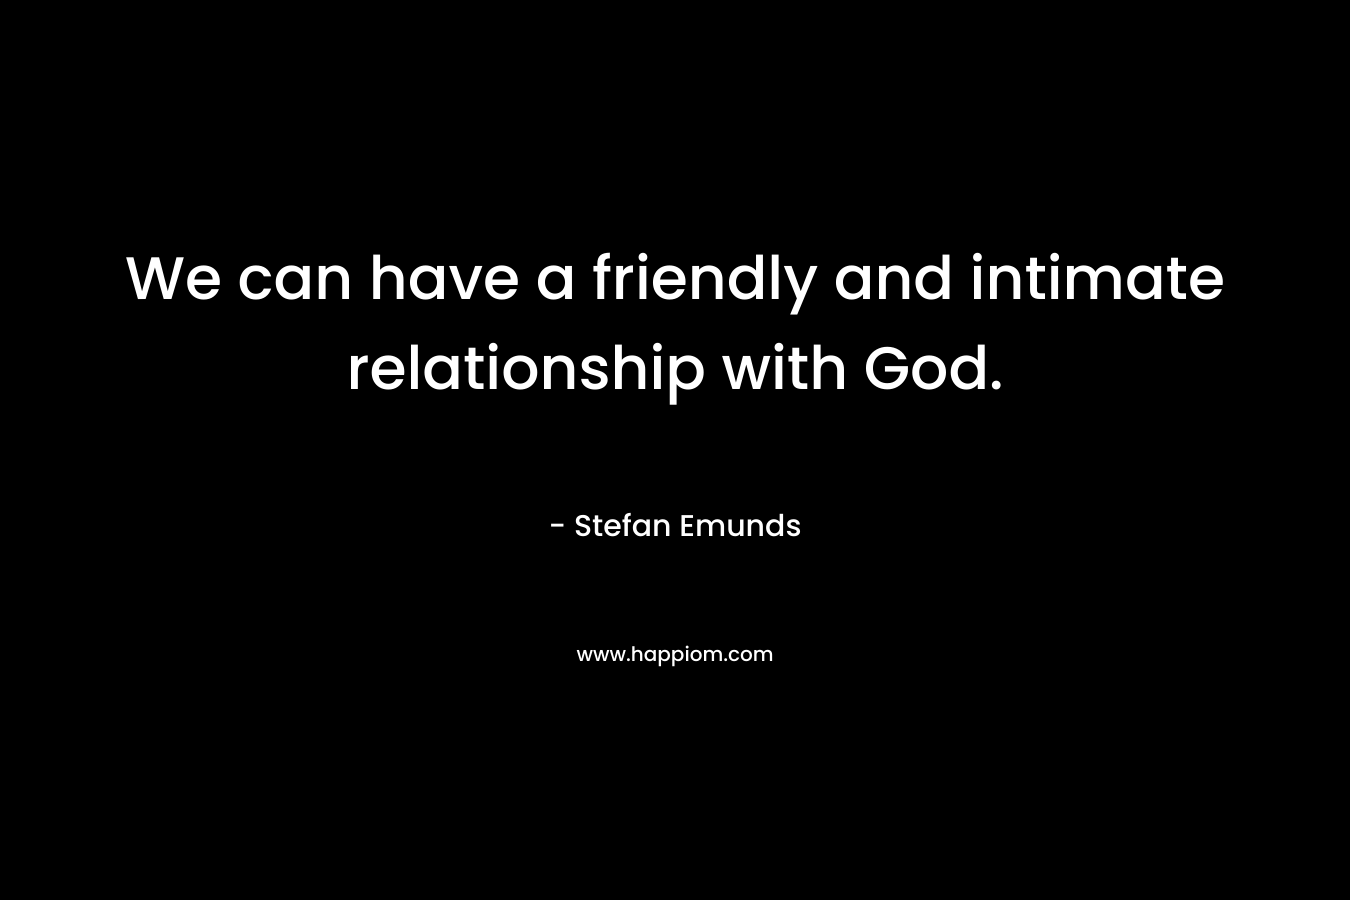 We can have a friendly and intimate relationship with God.